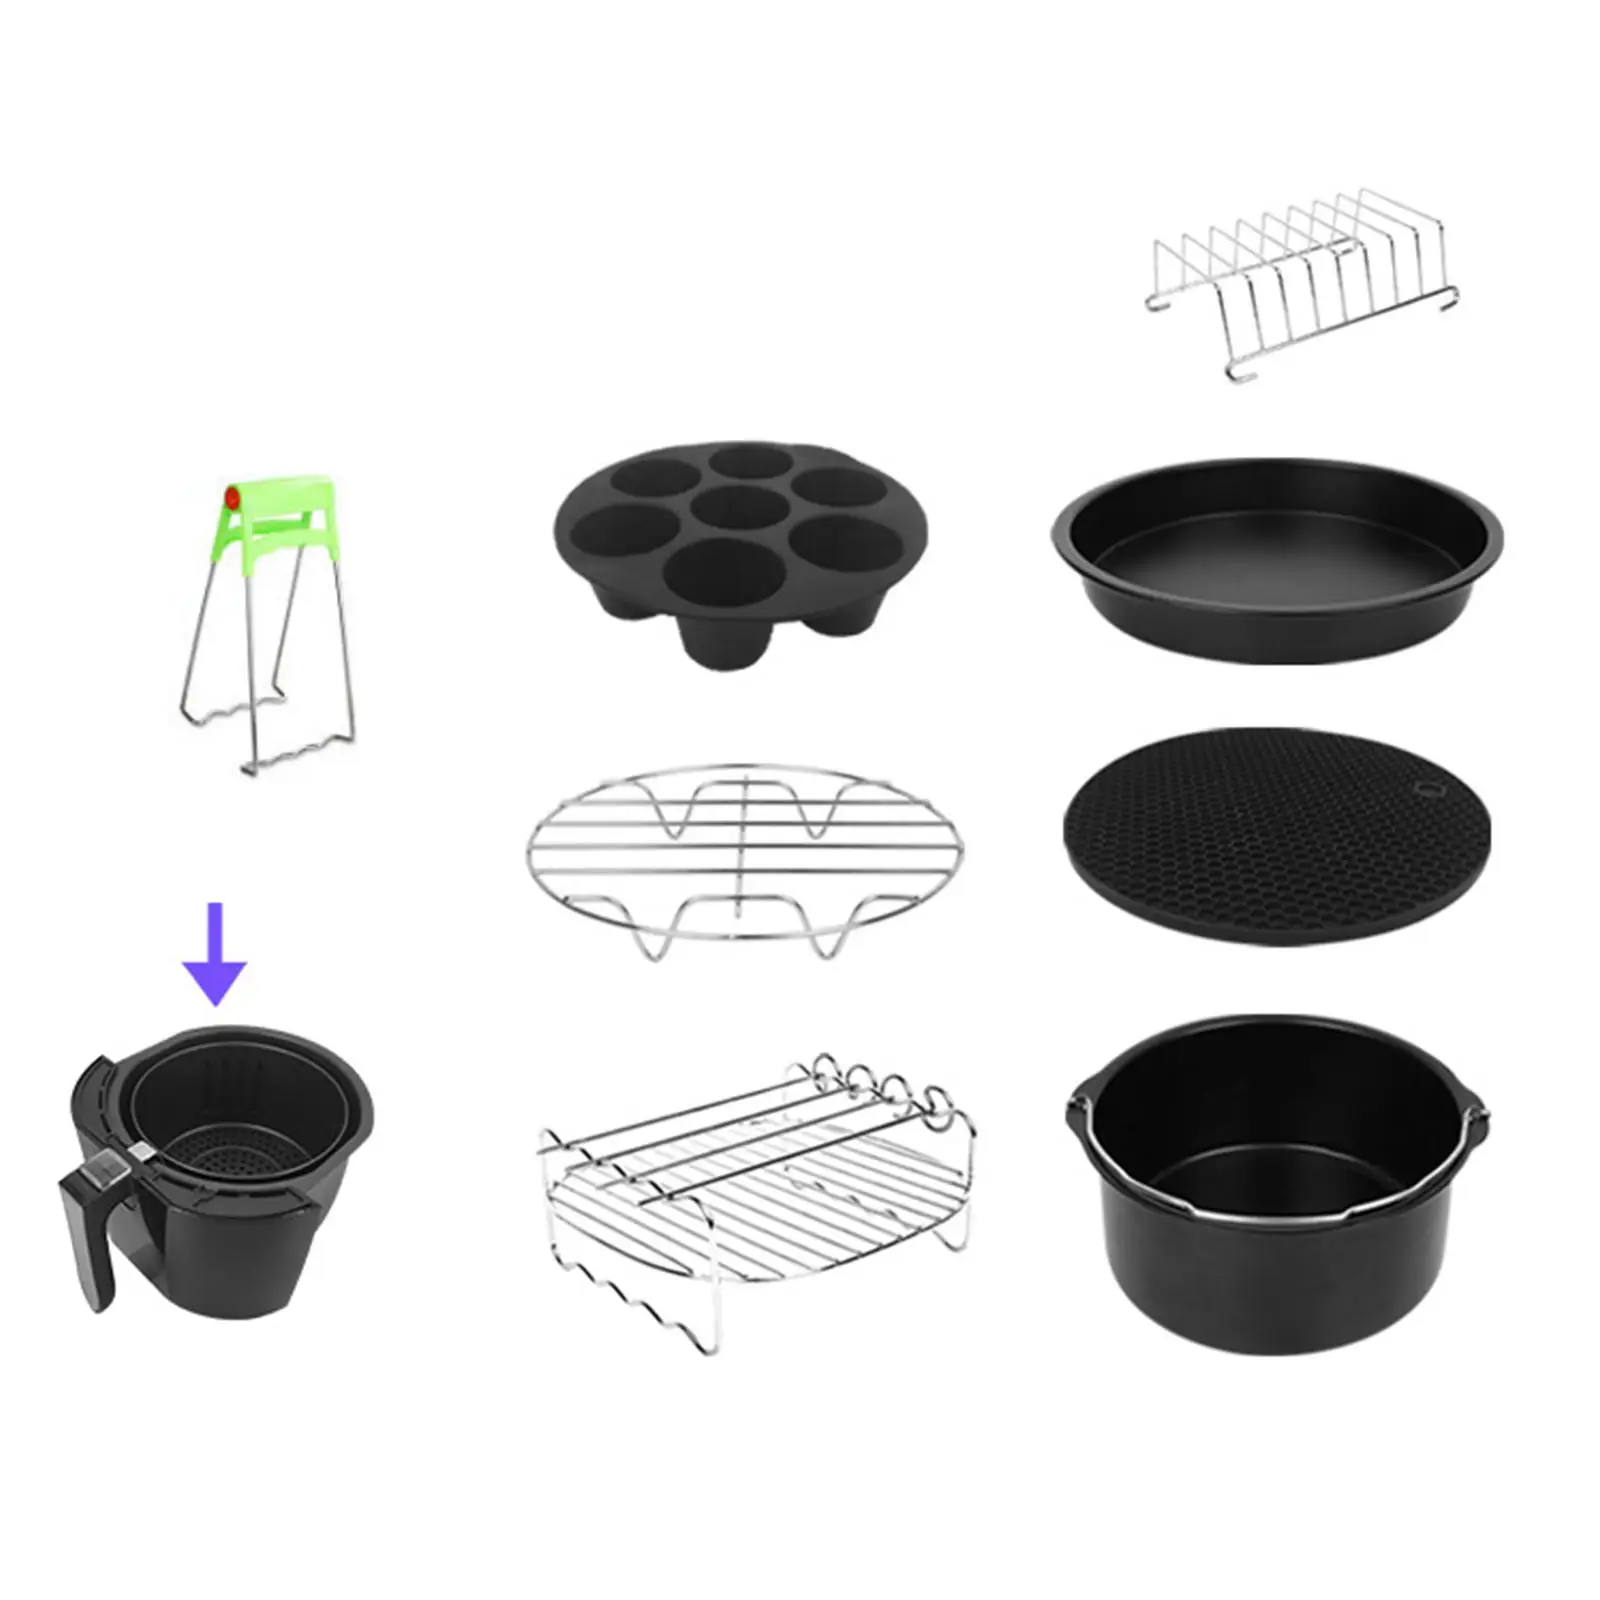 8x Non-Stick Air Fryer Accessories Set Air Fryer Parts Air Fryer Accessory Kit Cake Barrel Clamp for 3.5-6Qt BBQ Cooking Kitchen